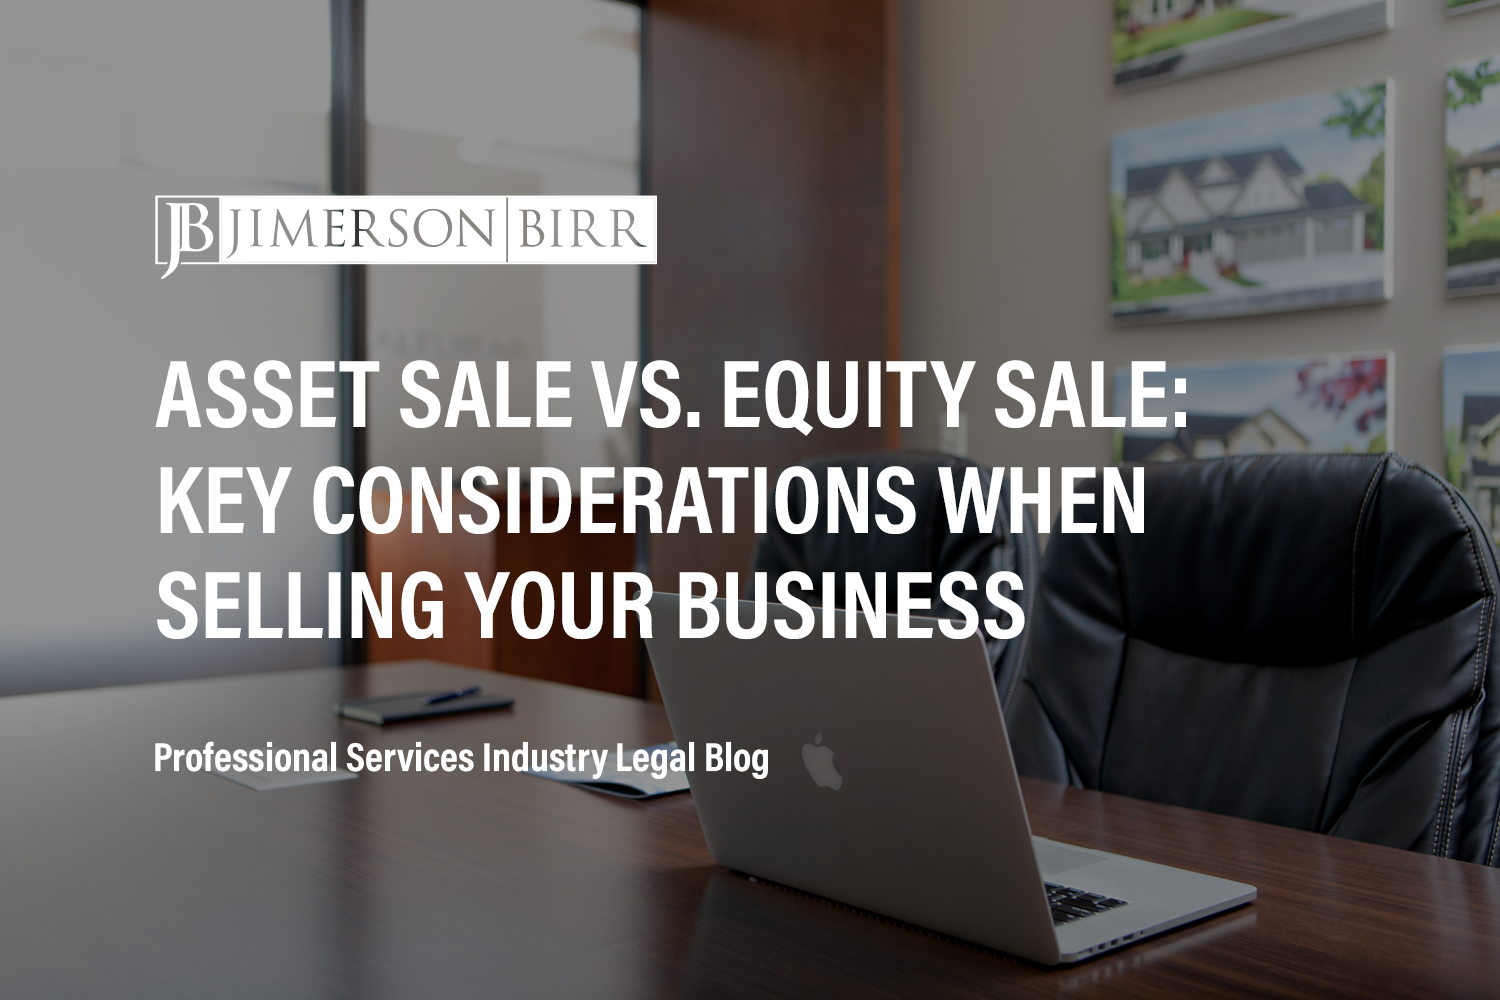 Asset Sale vs. Equity Sale: Key Considerations When Selling Your Business